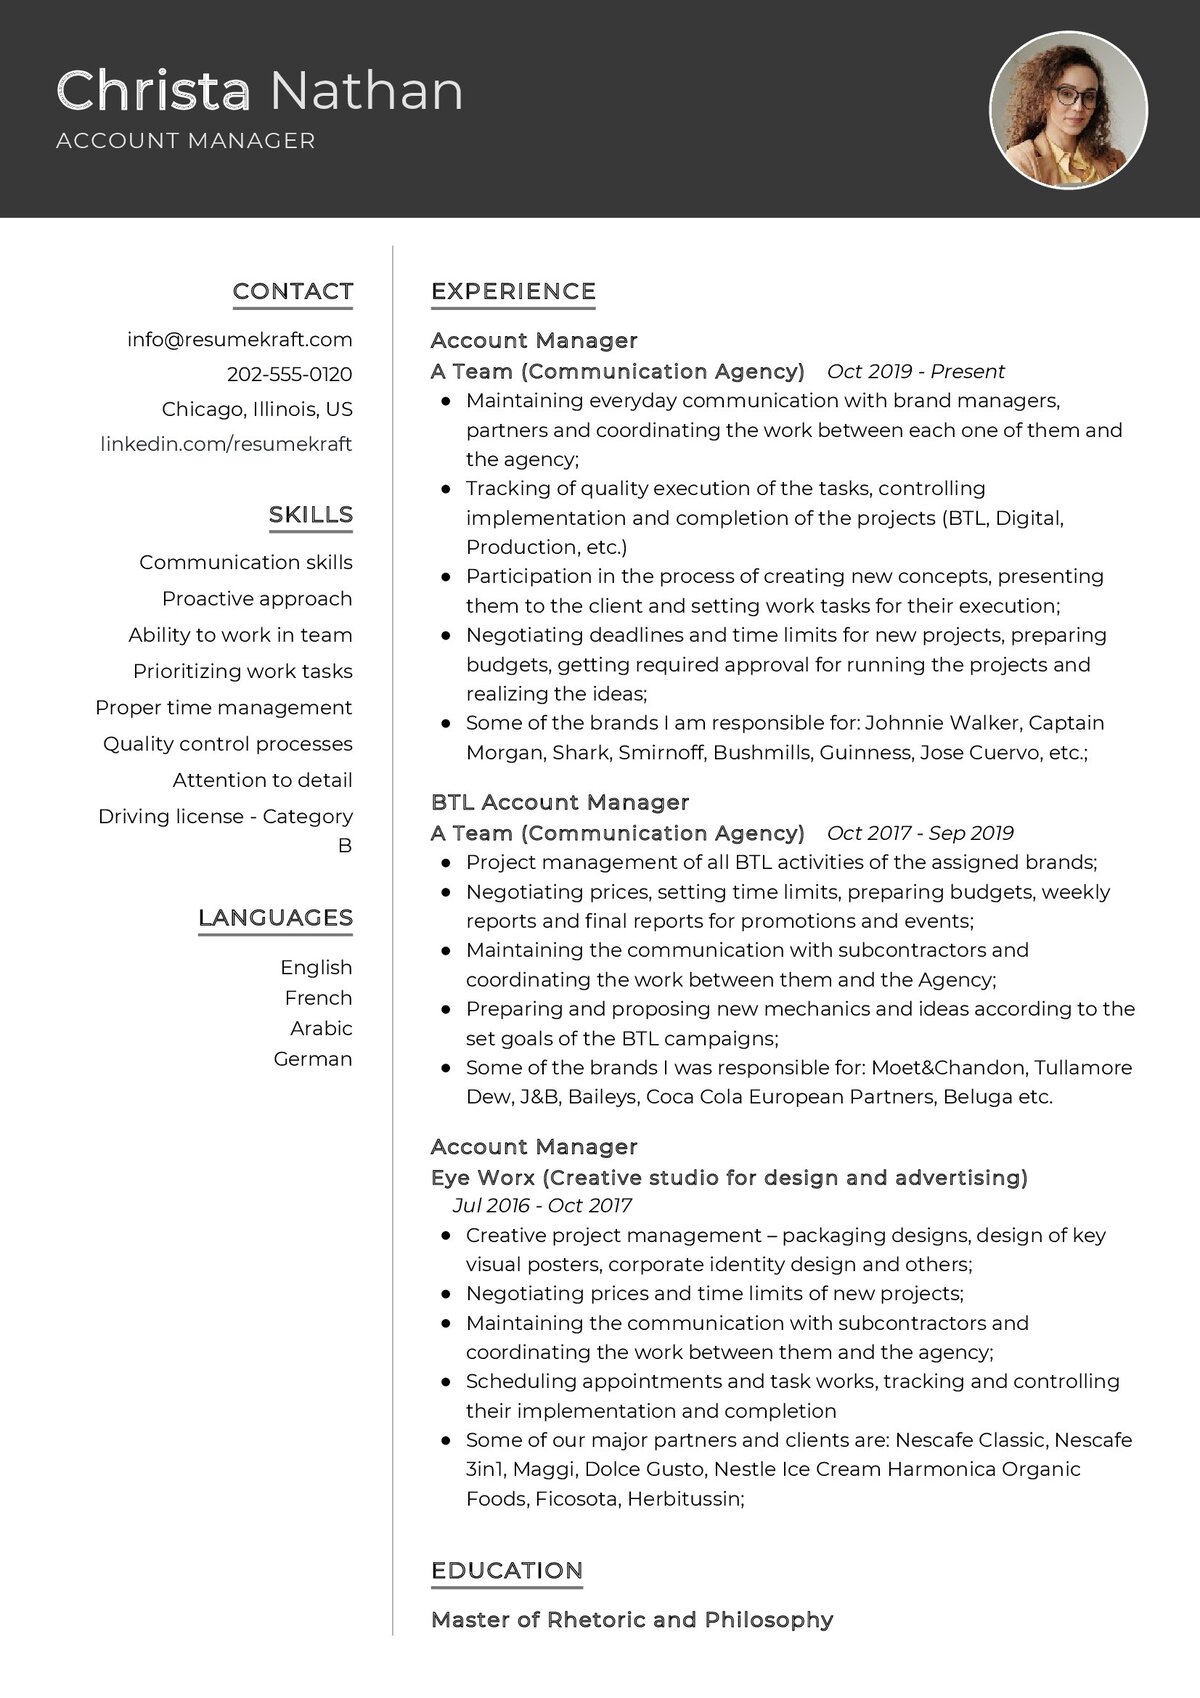 resume template for account manager